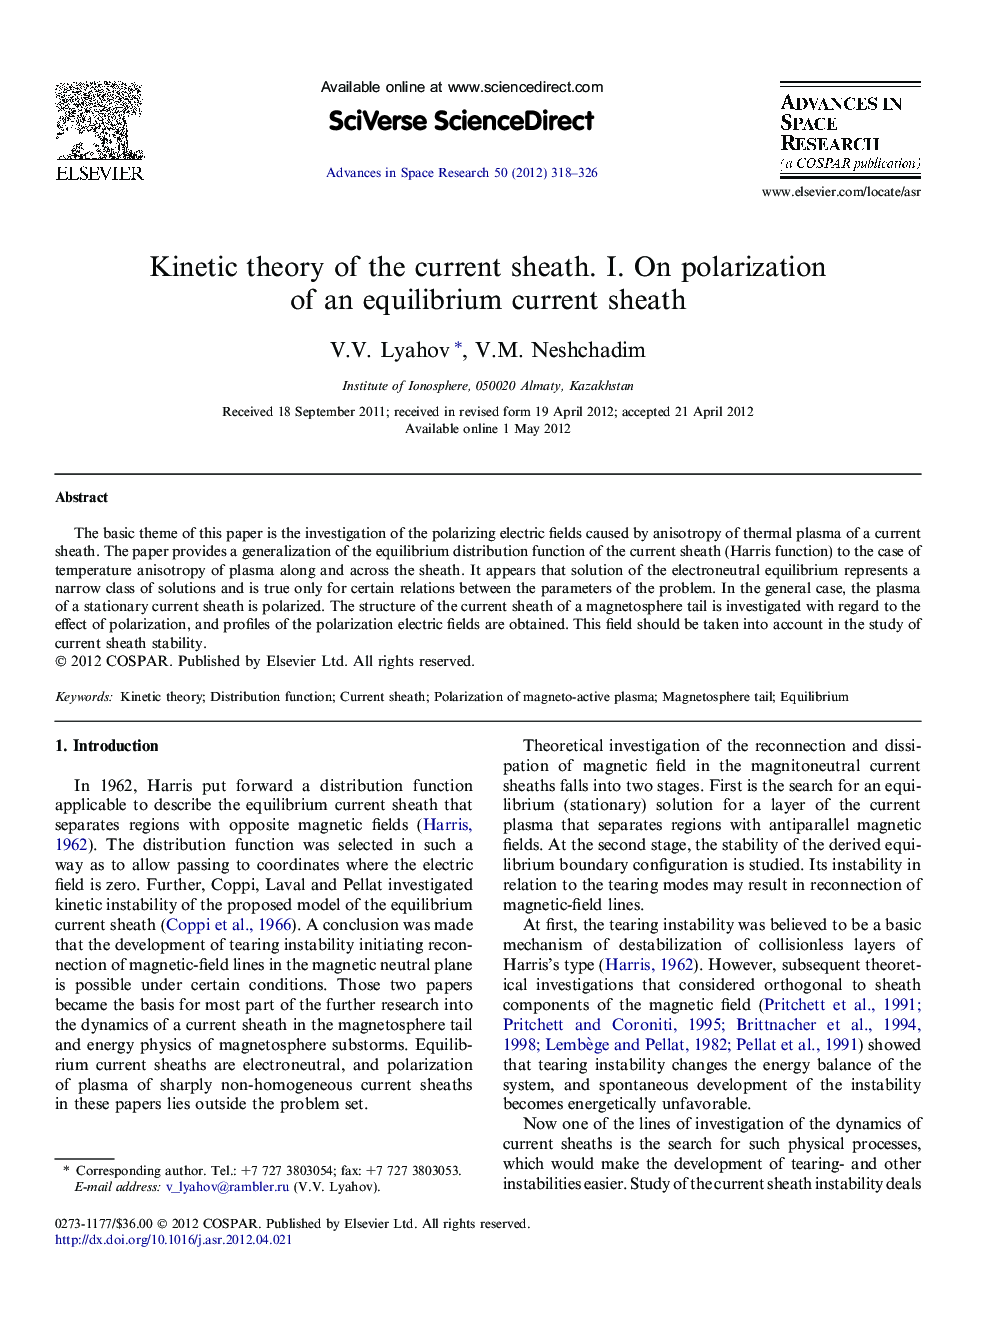 Kinetic theory of the current sheath. I. On polarization of an equilibrium current sheath